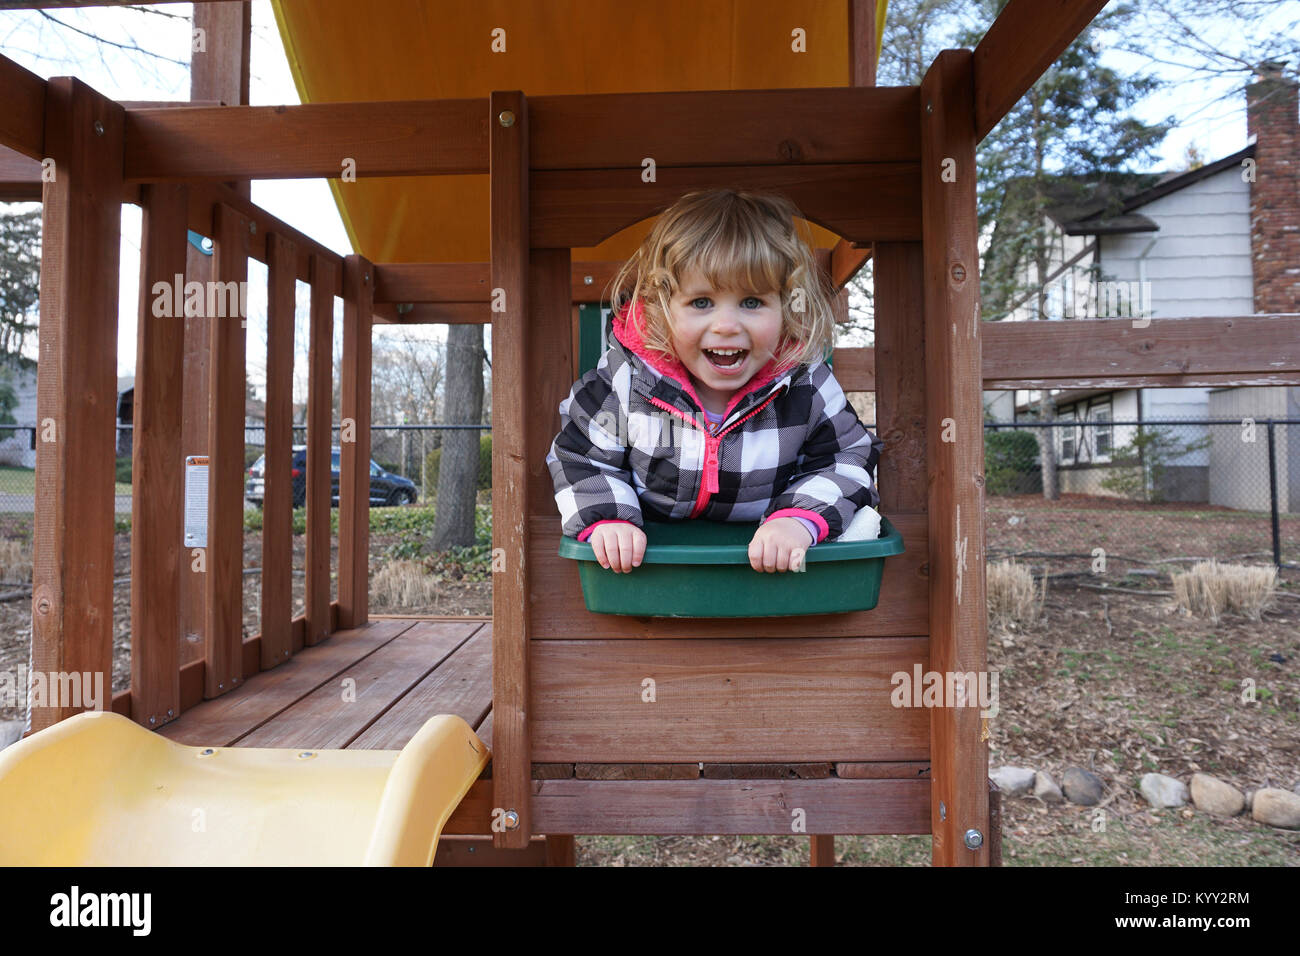 Portrait of happy girl playing on outdoor play equipment at playground Stock Photo